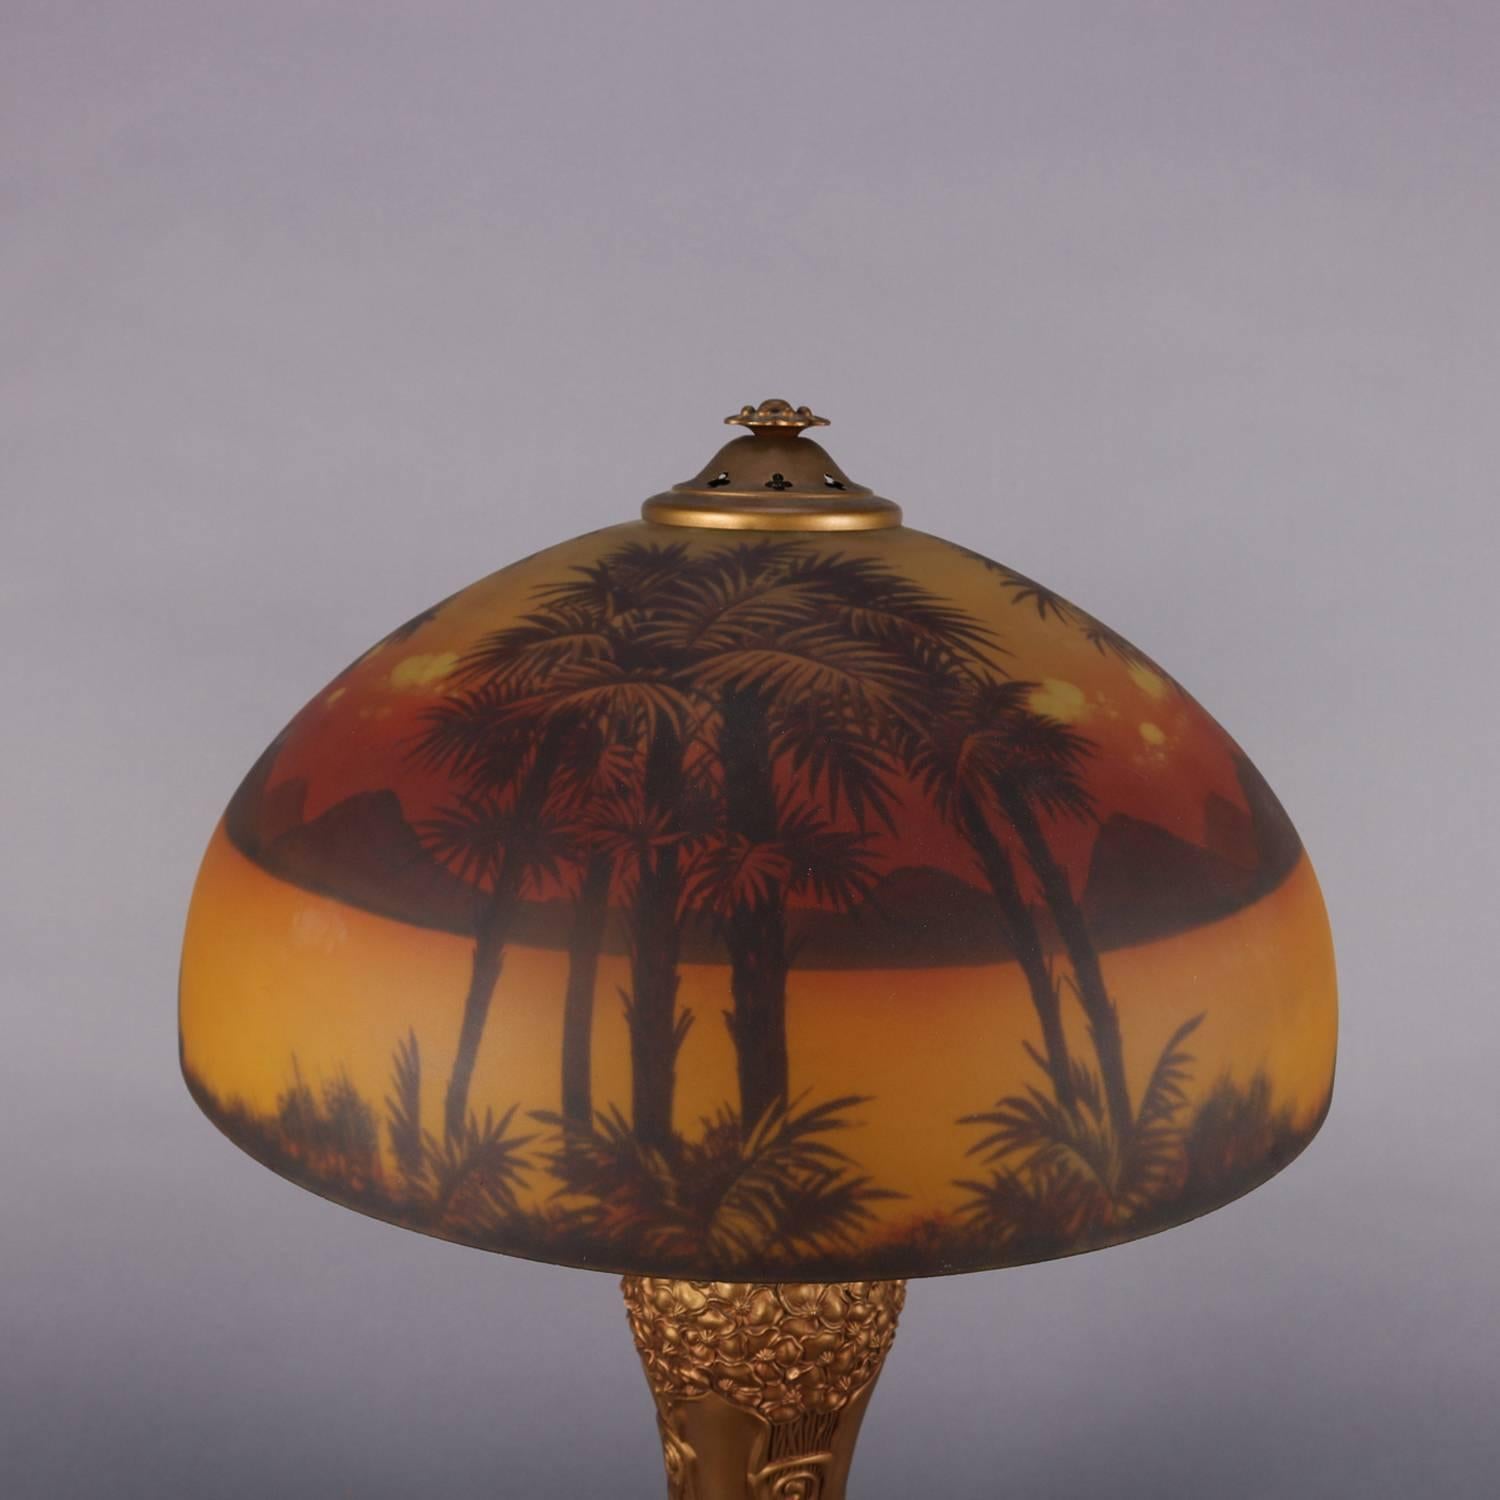 Arts and Crafts Art & Crafts Pittsburgh Reverse Painted Phoenix Table Lamp, circa 1910